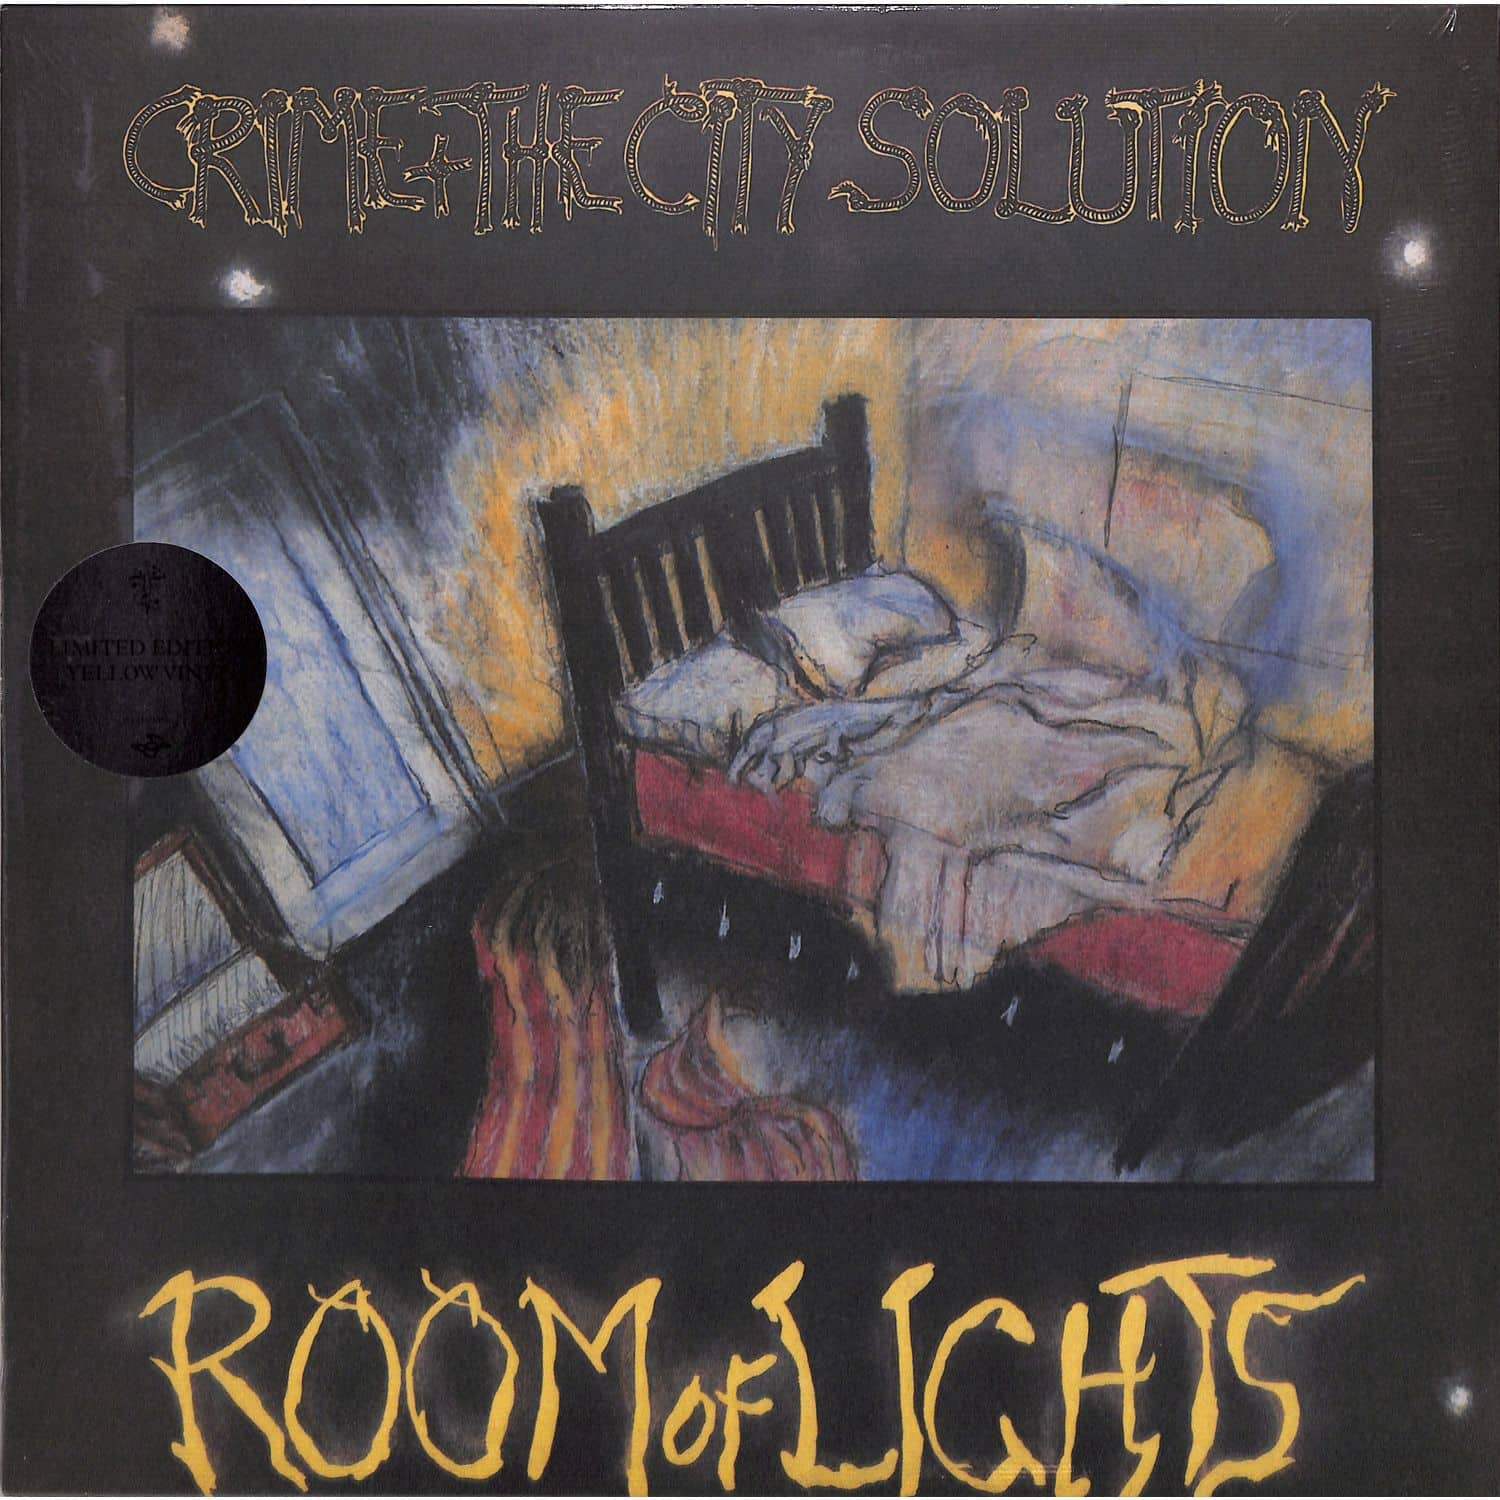 Crime & The City Solution - ROOM OF LIGHTS 